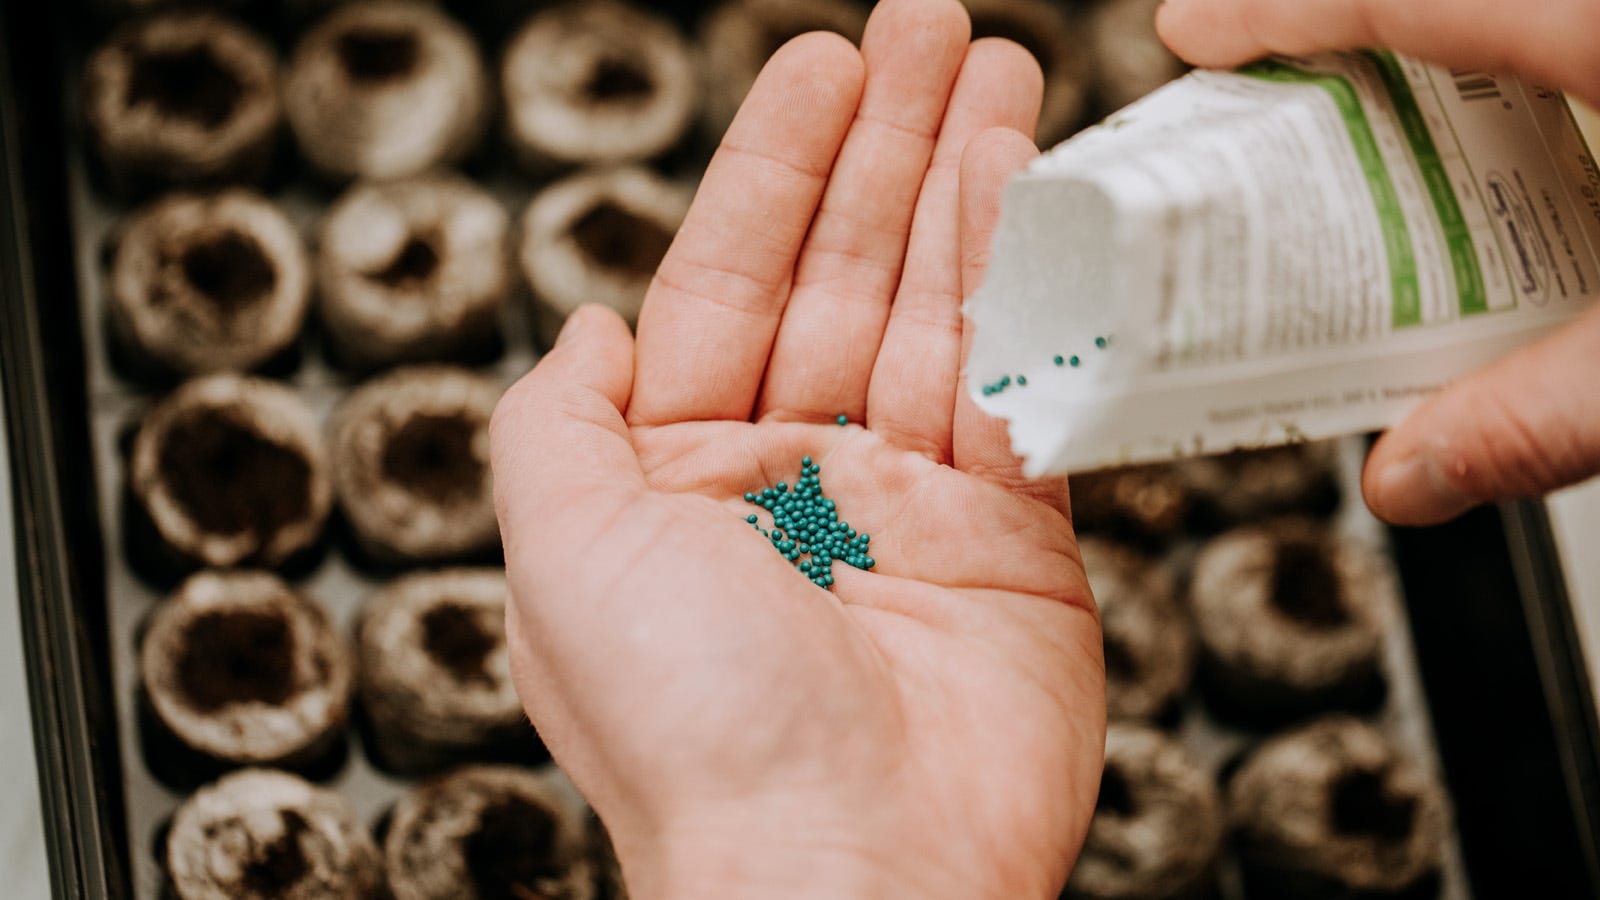 A hand holding seeds while more seeds are being poured out of a vegetable seed package